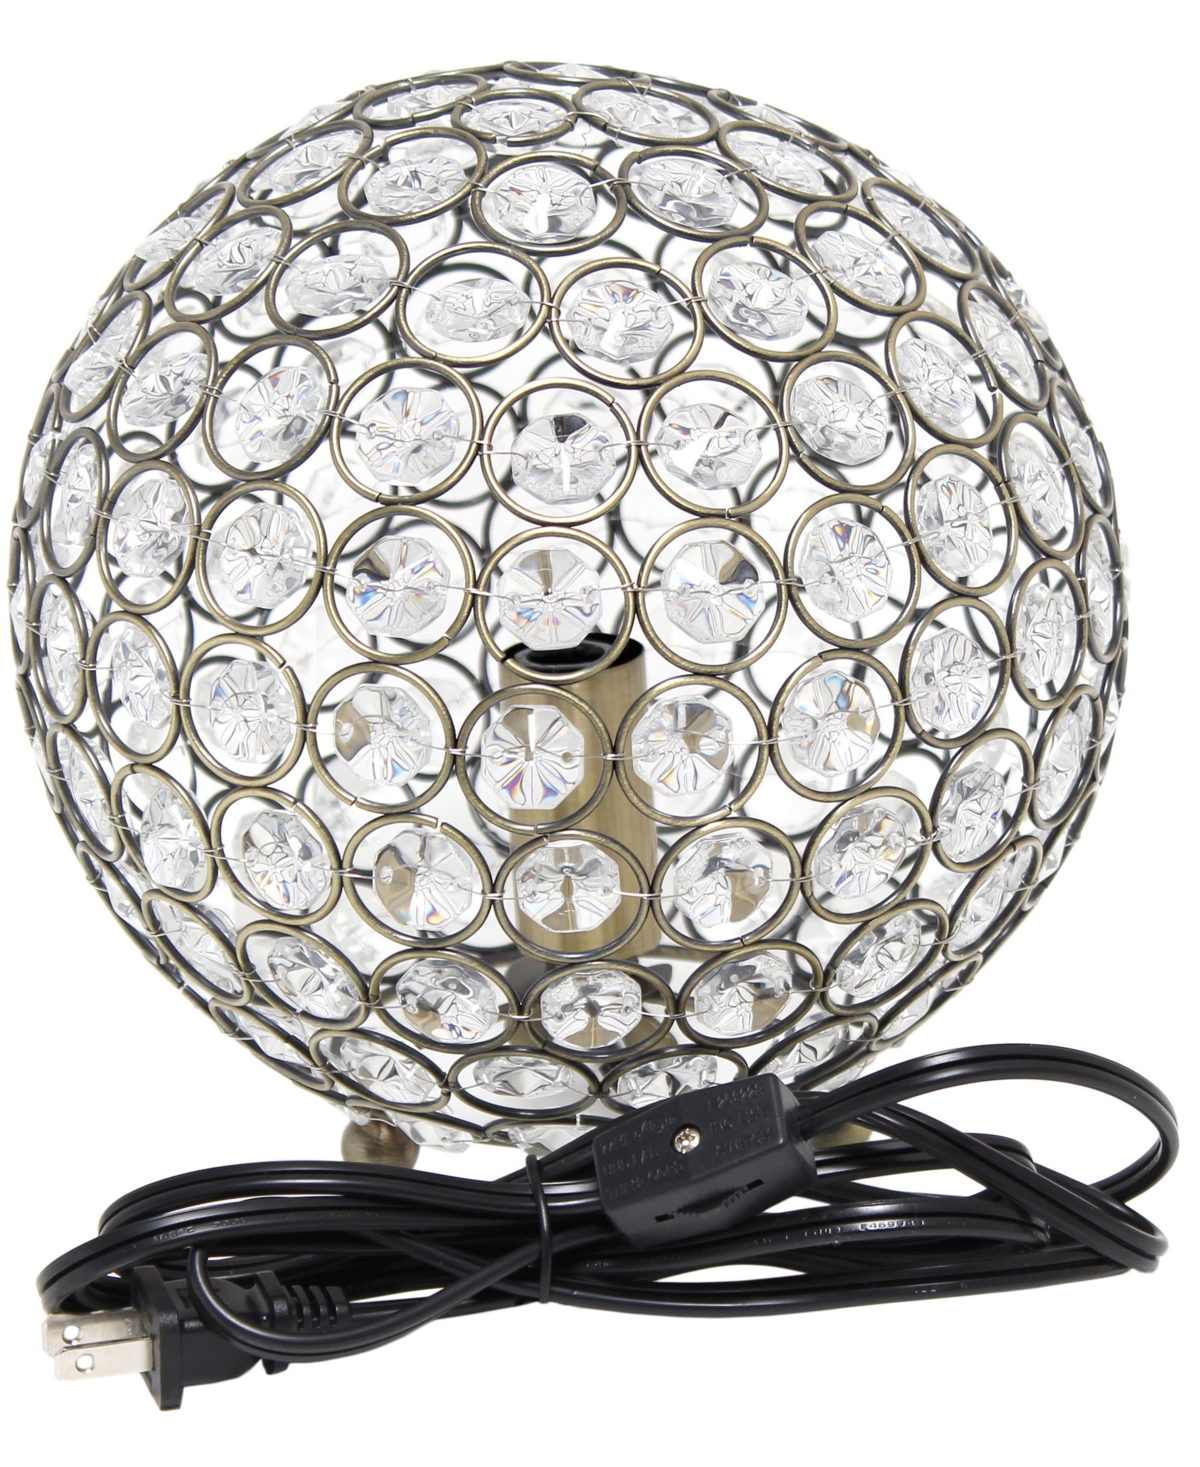 Shop Lalia Home 8" Elipse Medium Contemporary Metal Crystal Round Sphere Glamorous Orb Table Lamp In Antique Brass